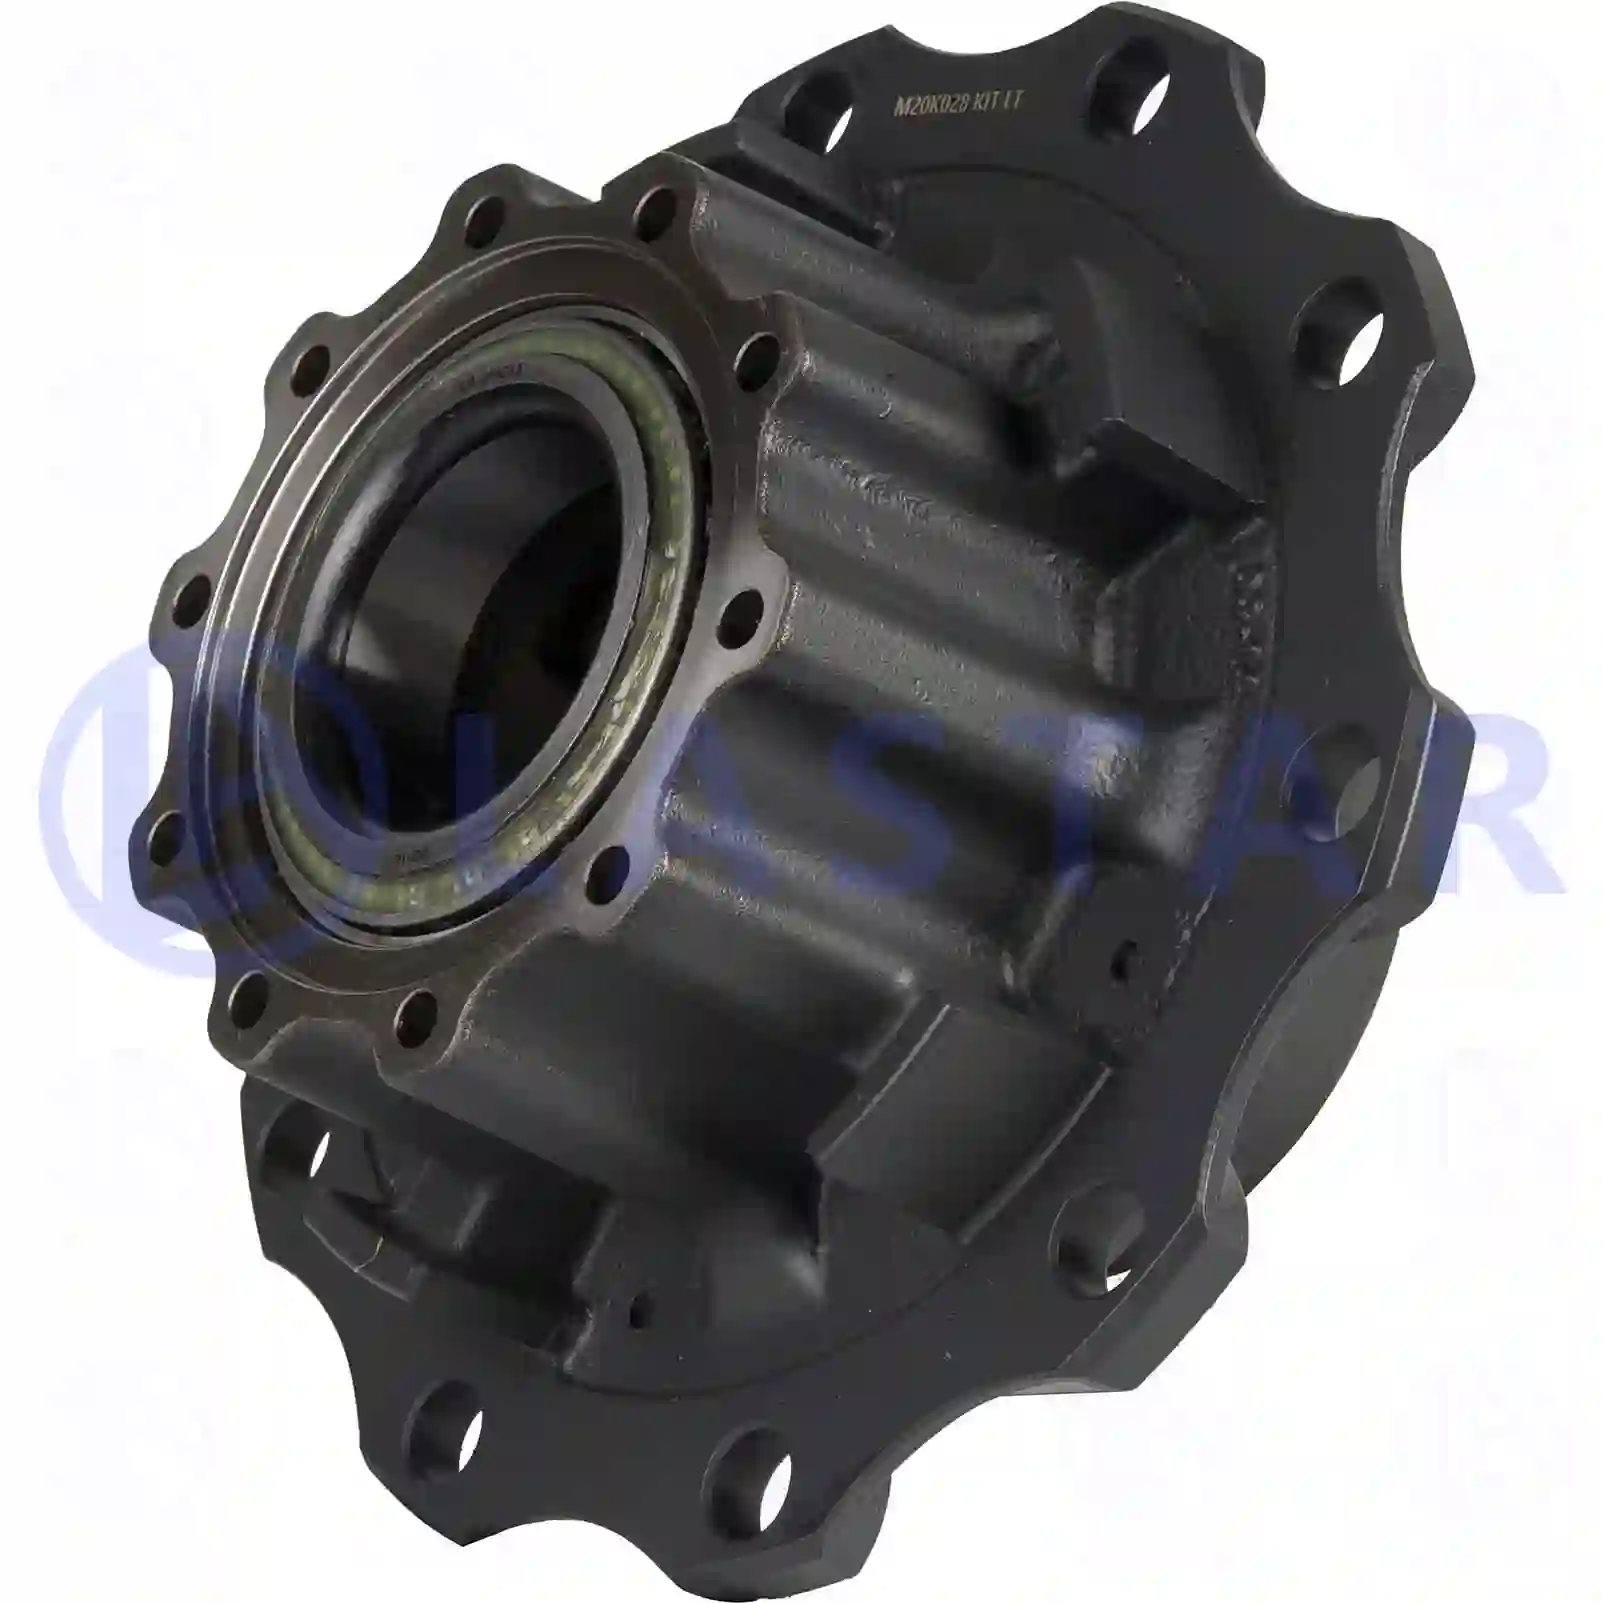 Wheel hub, without bearings, 77726965, 1942754, 2290538, ZG30225-0008, , , ||  77726965 Lastar Spare Part | Truck Spare Parts, Auotomotive Spare Parts Wheel hub, without bearings, 77726965, 1942754, 2290538, ZG30225-0008, , , ||  77726965 Lastar Spare Part | Truck Spare Parts, Auotomotive Spare Parts